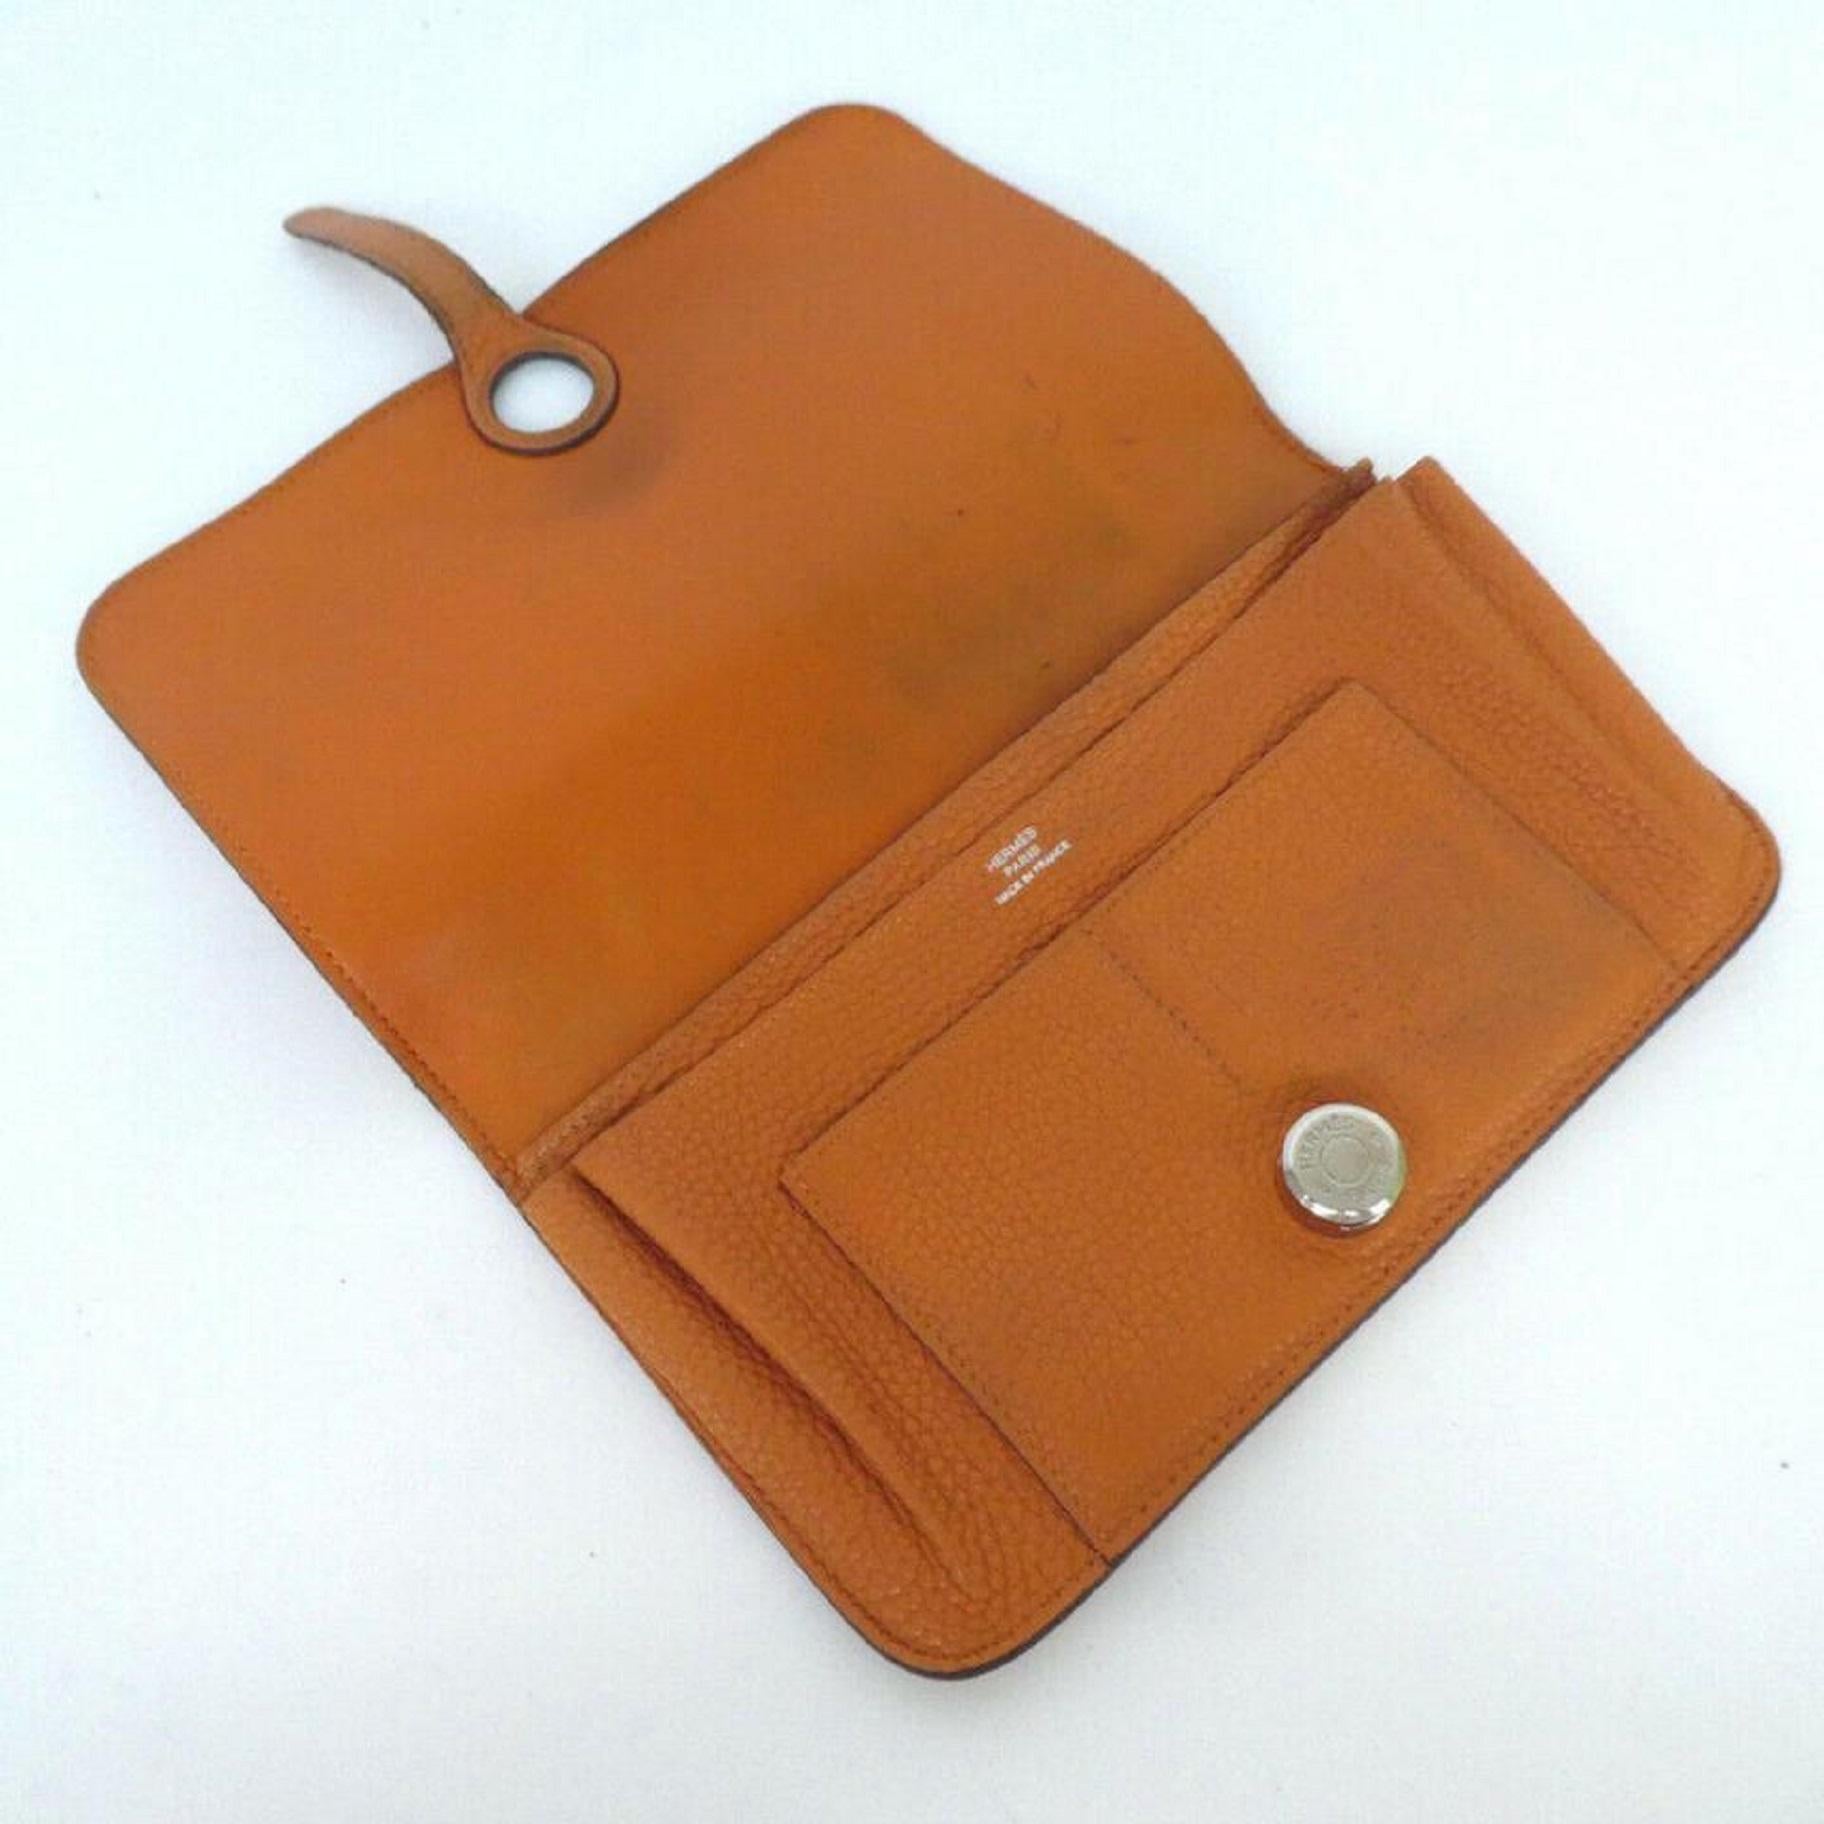 Category purse
 Brand HERMES
 SizeW20cm x H13cm x D2cm
 W7.9' x H5.1' x D0.8'
 Color Orange
 Material Leather
 Spec Bill Compartment x 1,Card Slotx5
 
 GOOD CONDITION
 (7/10 or B)
 Retail $2025
 Outside: There are scratches and marks. 
 Inside: Rub